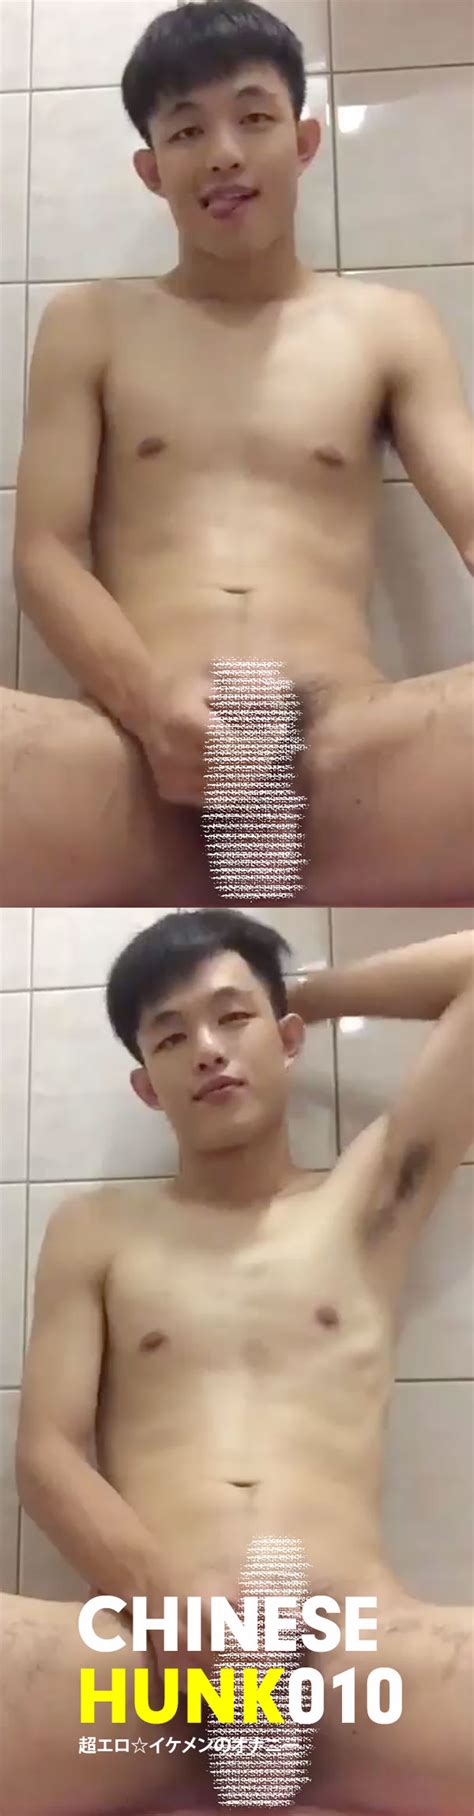 Chinese Hunk No Queerclick